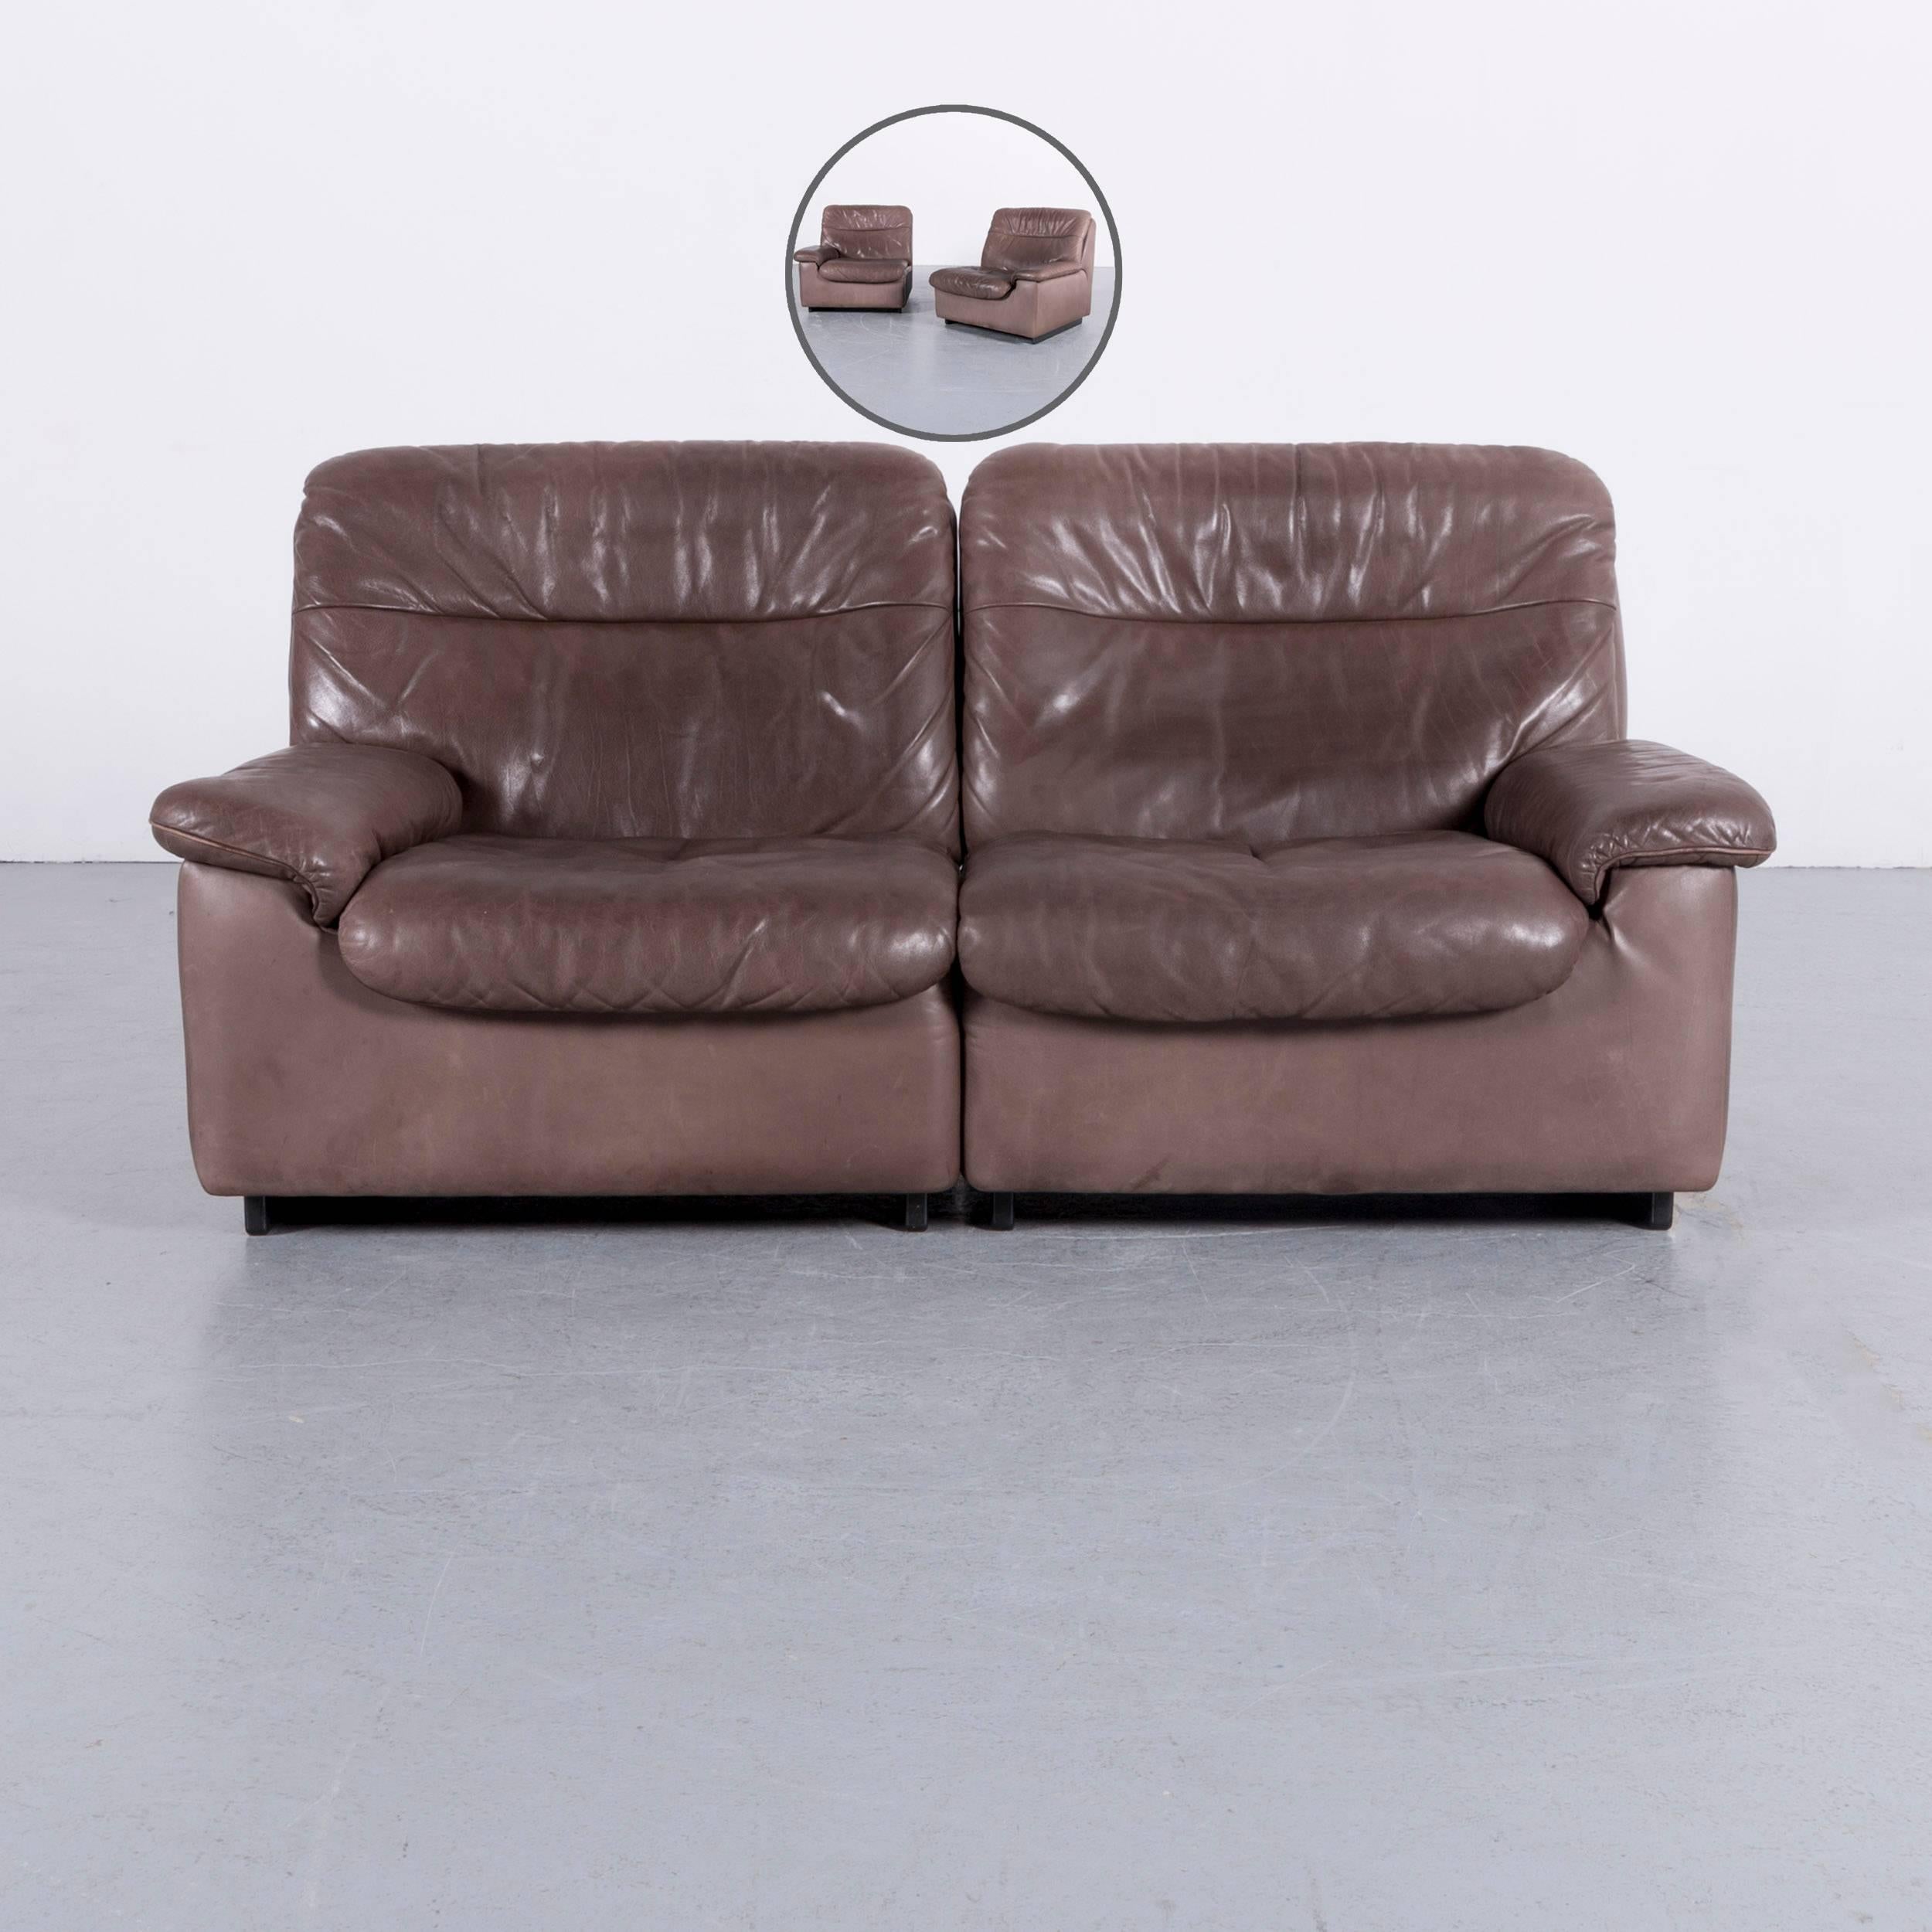 We bring to you an De Sede DS 66 designer leather sofa set brown two-seat.